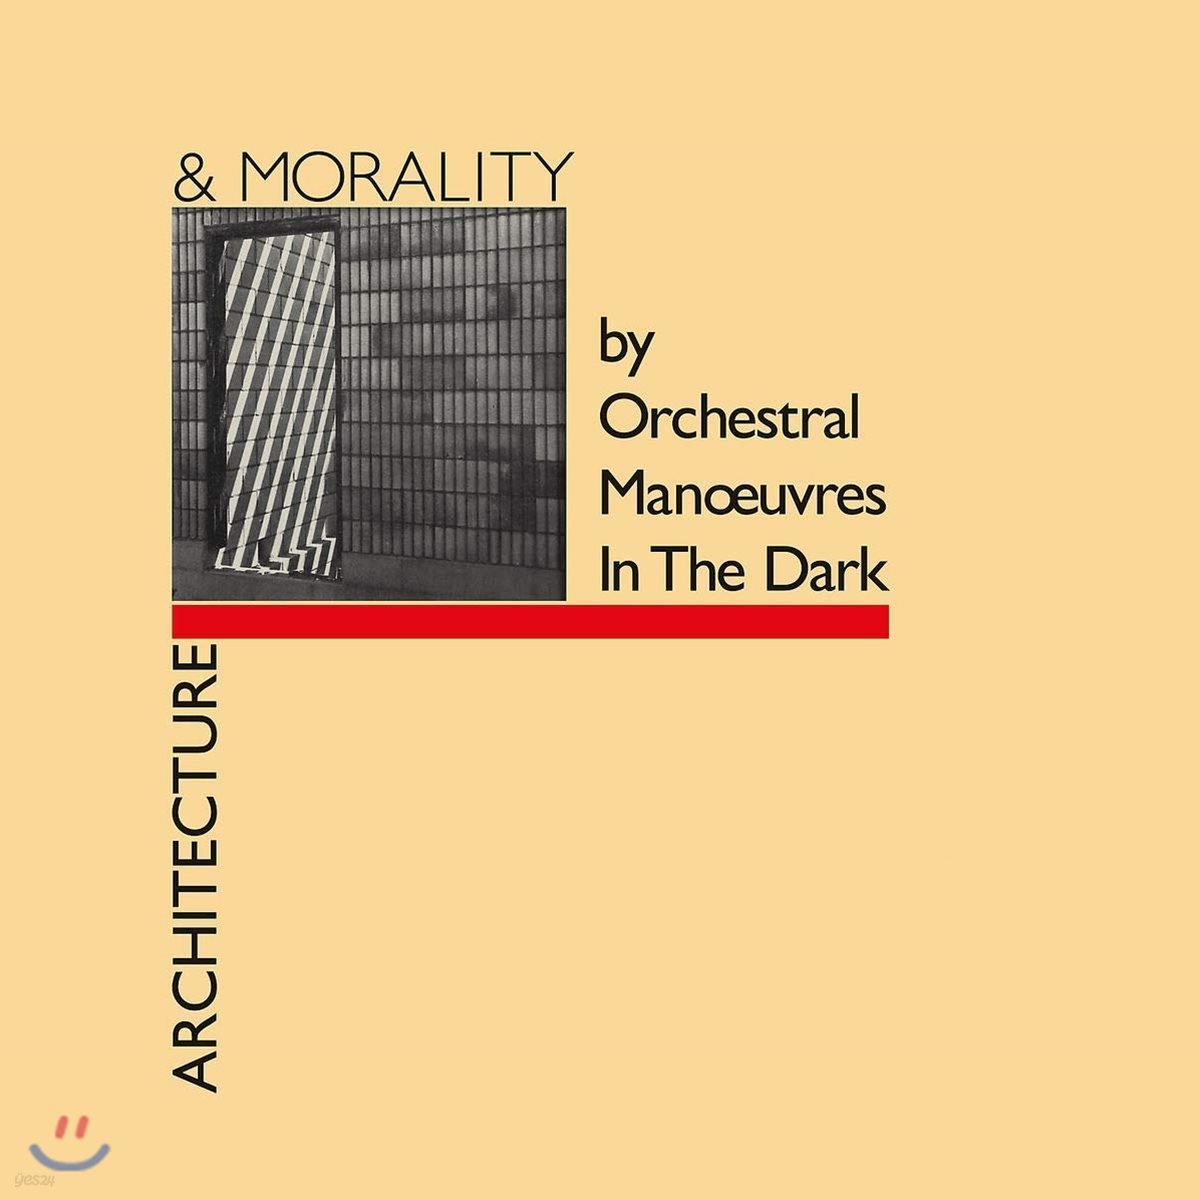 O.M.D (Orchestral Manoeuvres In The Dark) - Architecture & Morality [LP]